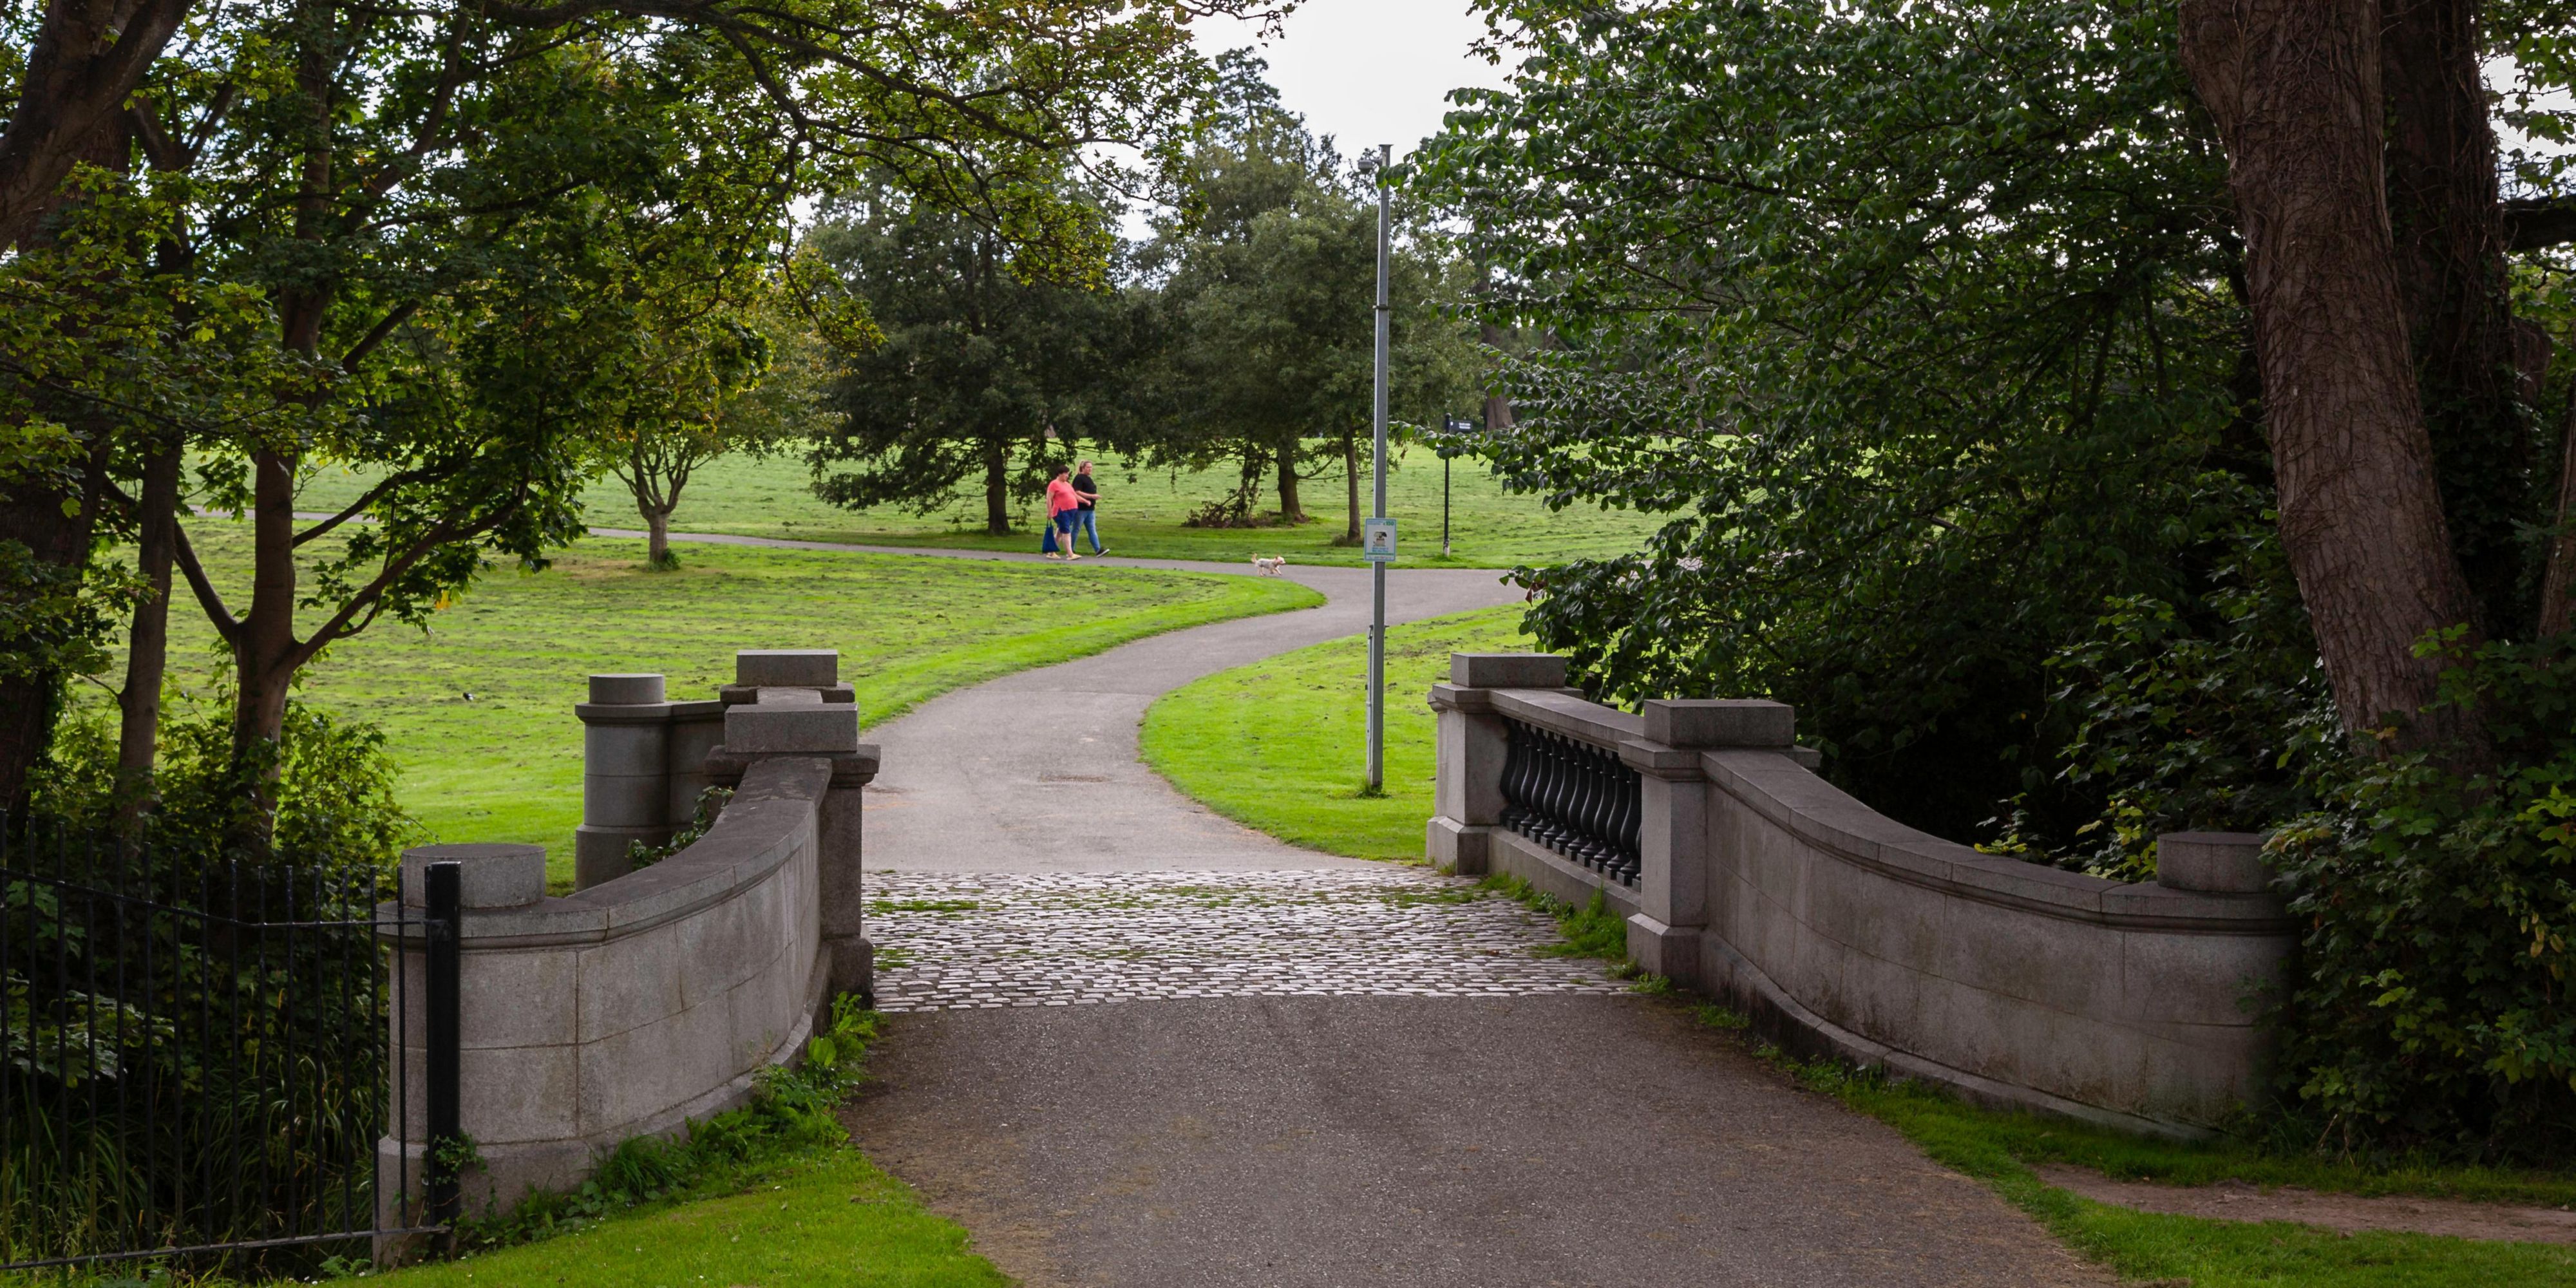 Take a stroll in the leafy Northwood park, and feed the ducks or watch the swans swimming in the lake. For jogging enthusiasts, ask for a running map from the hotel reception and try out one of the routes through the park.